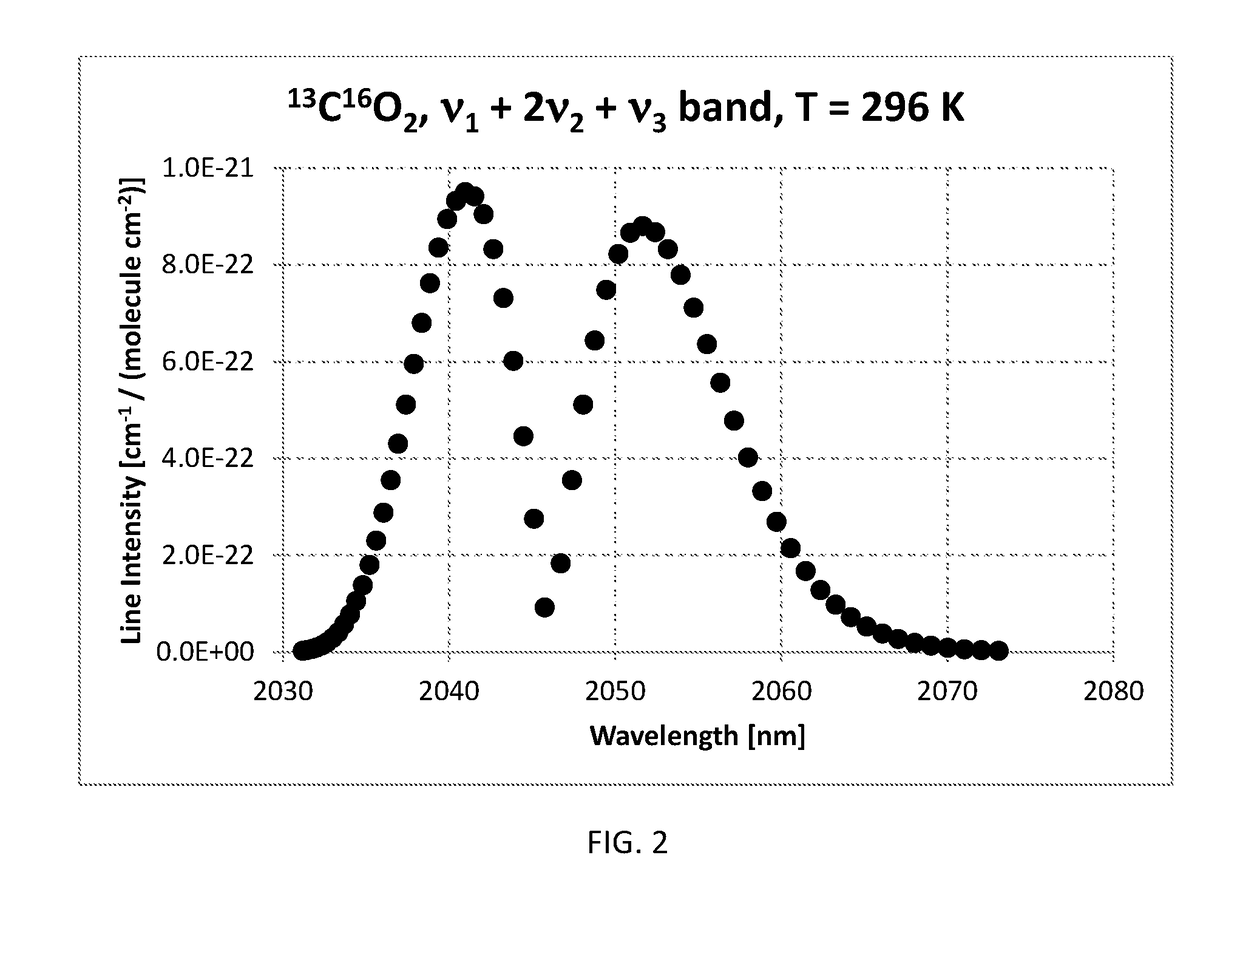 Method of measuring the ratio of isotopologue concentrations in the gas phase